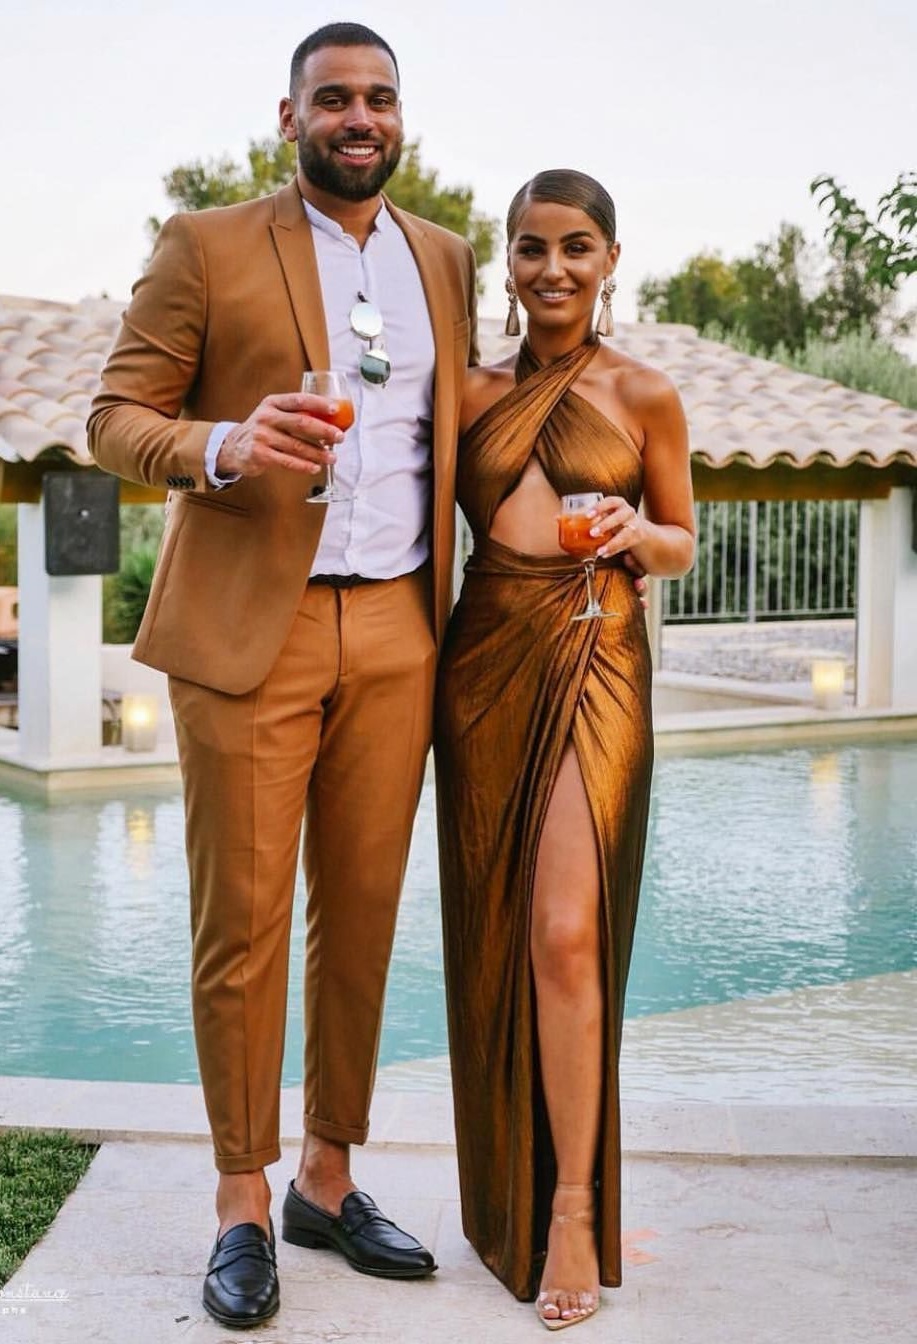 matching couples outfits. 2 50+ Stylish Formal Matching Outfits for Couples - 11